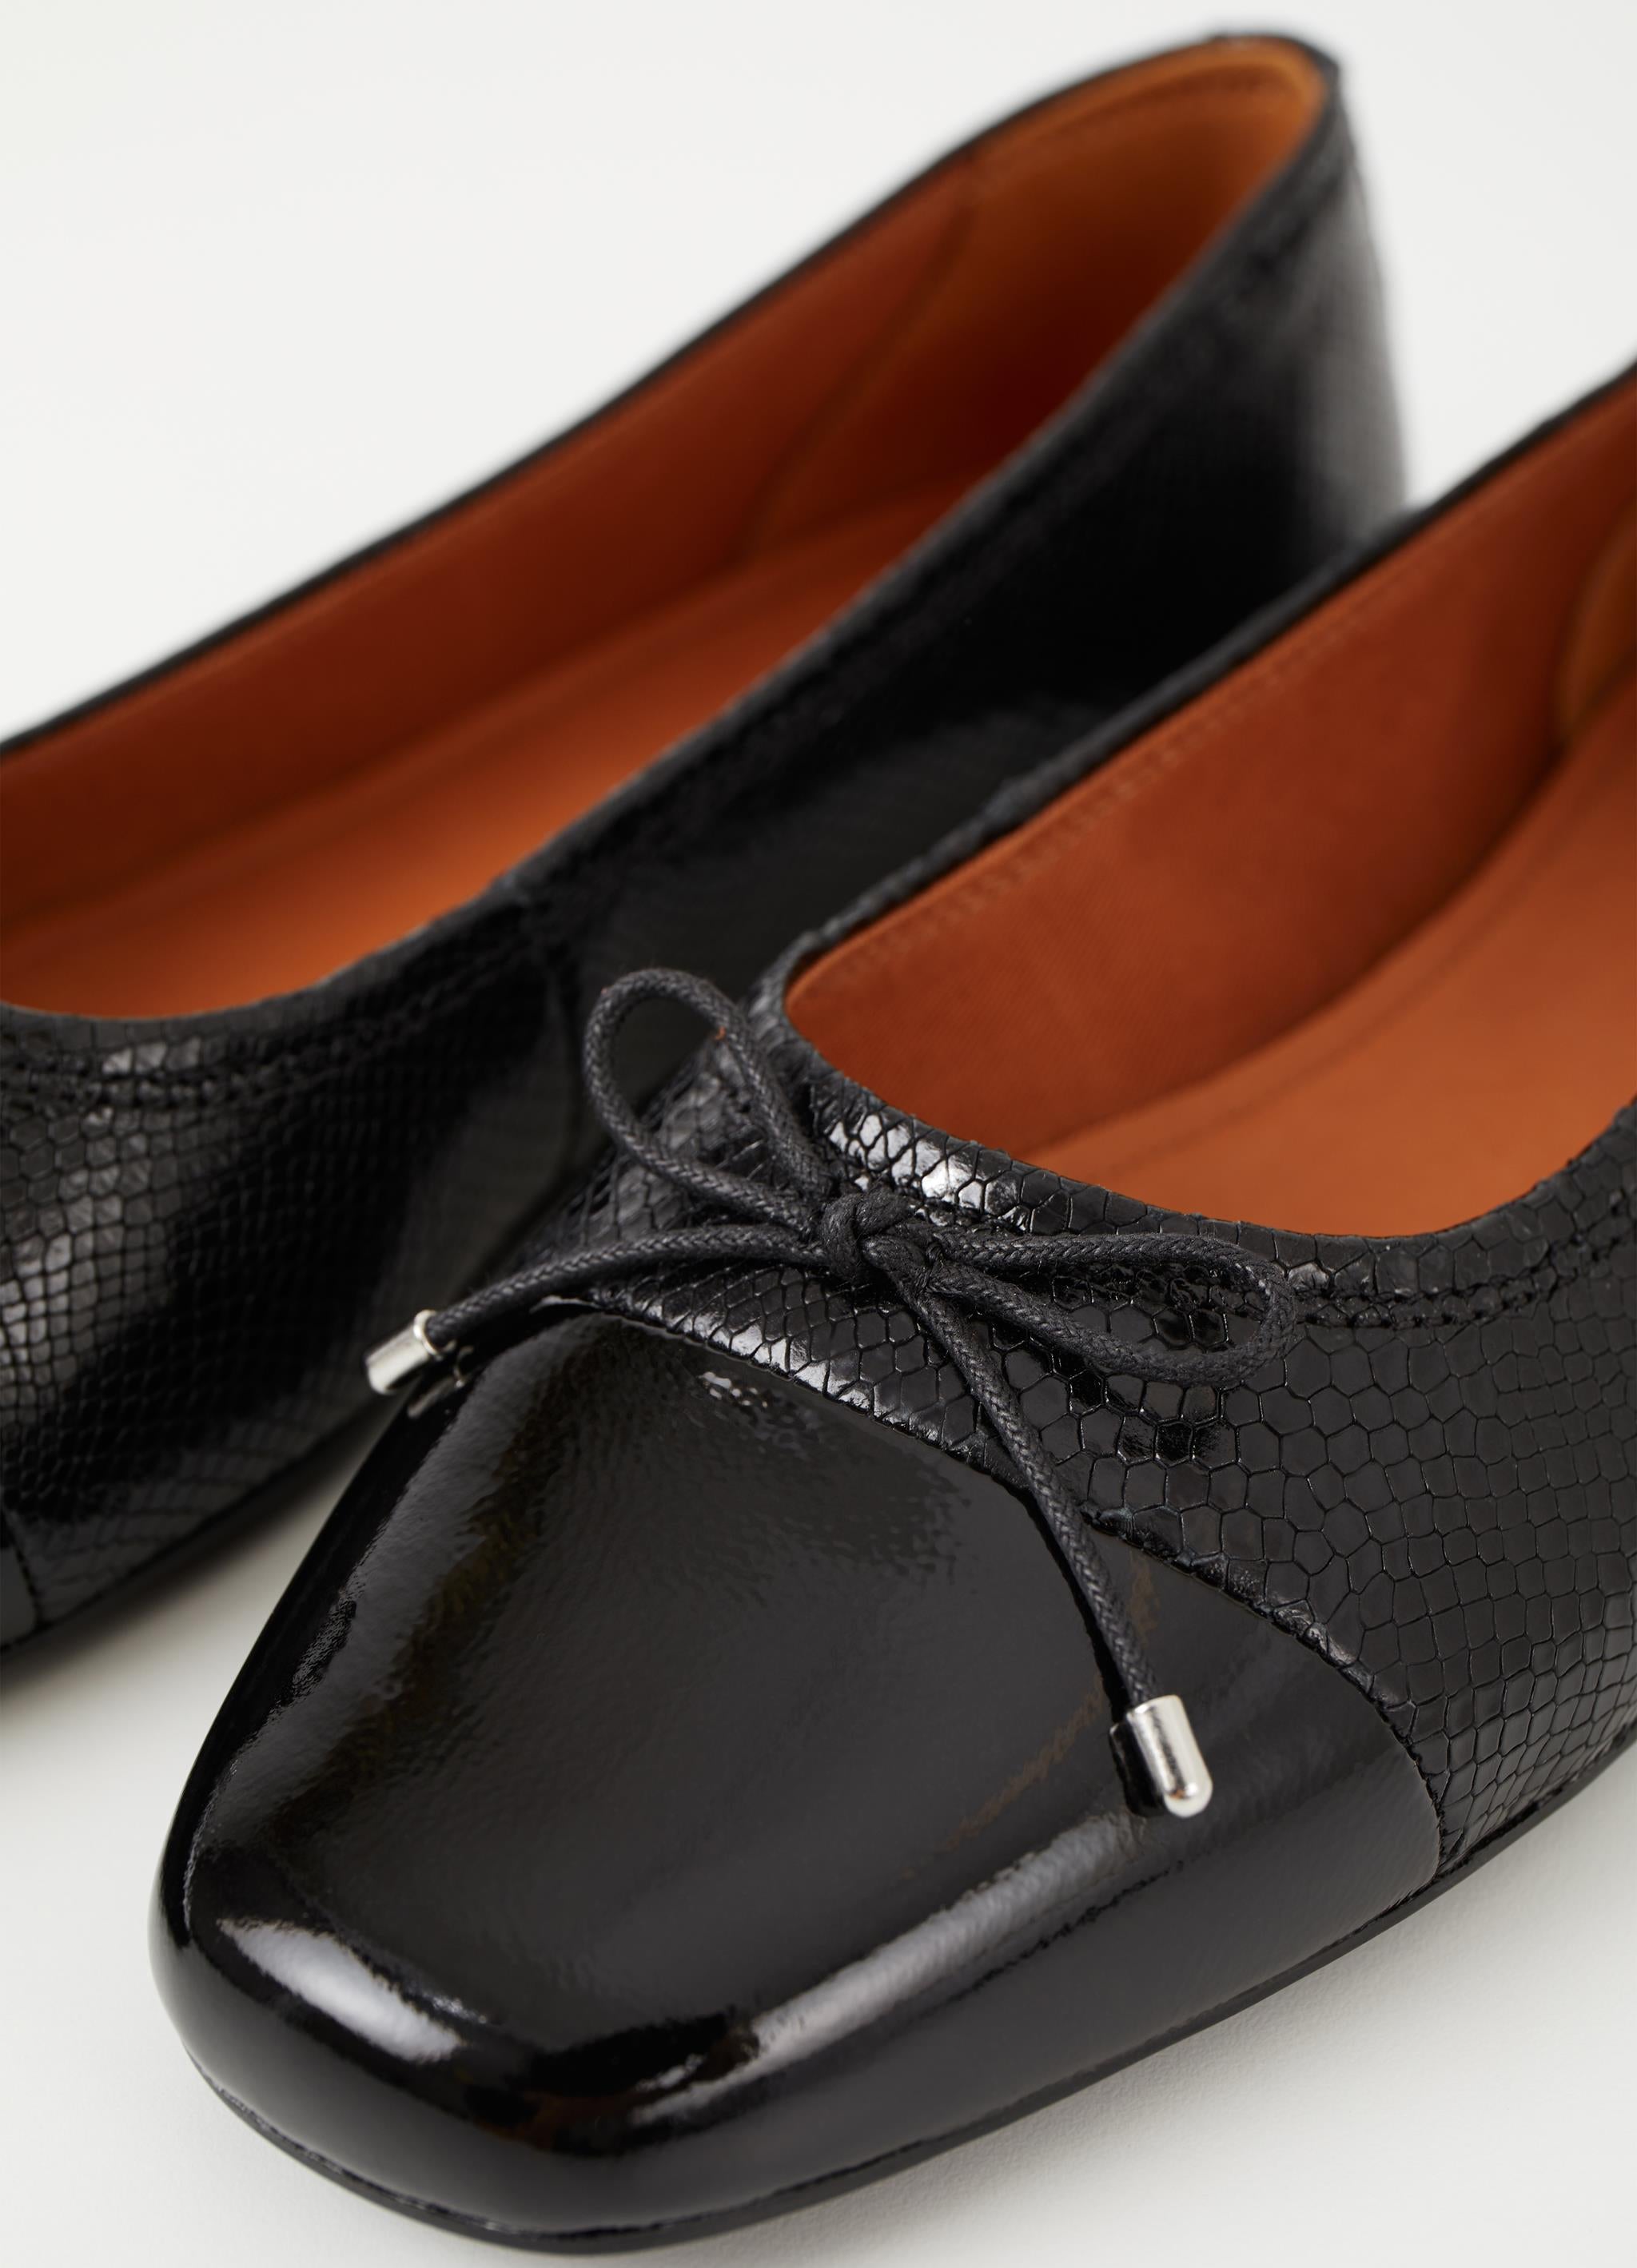 Black leather ballet pump with croc effect leather a patent toe and tie details with silver tips